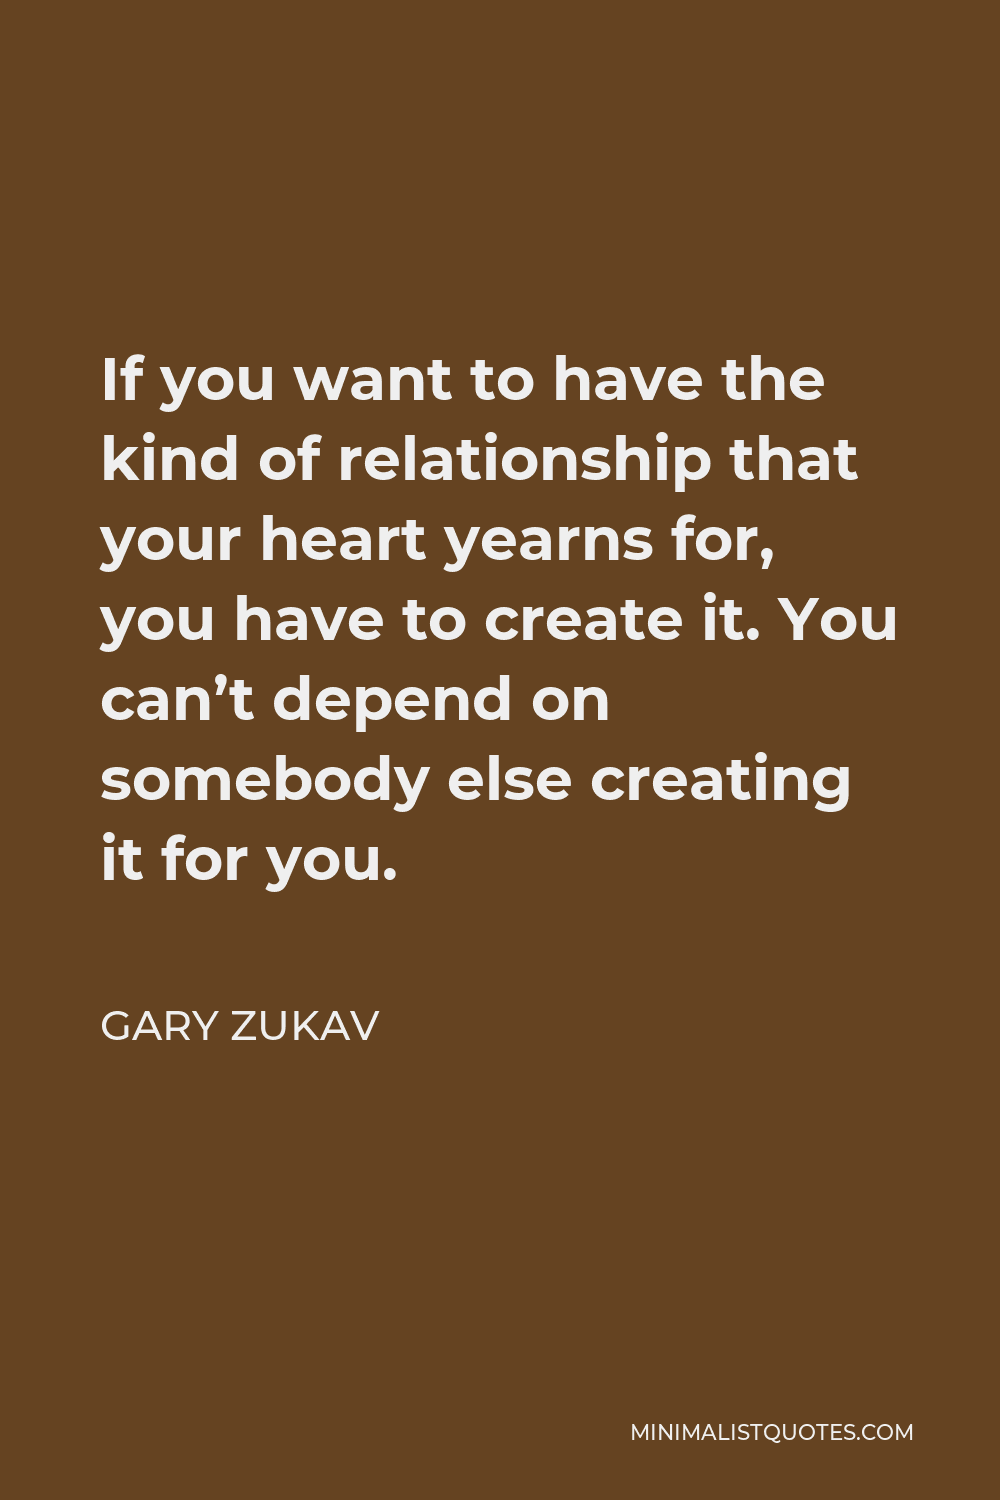 Gary Zukav Quote - If you want to have the kind of relationship that your heart yearns for, you have to create it. You can’t depend on somebody else creating it for you.